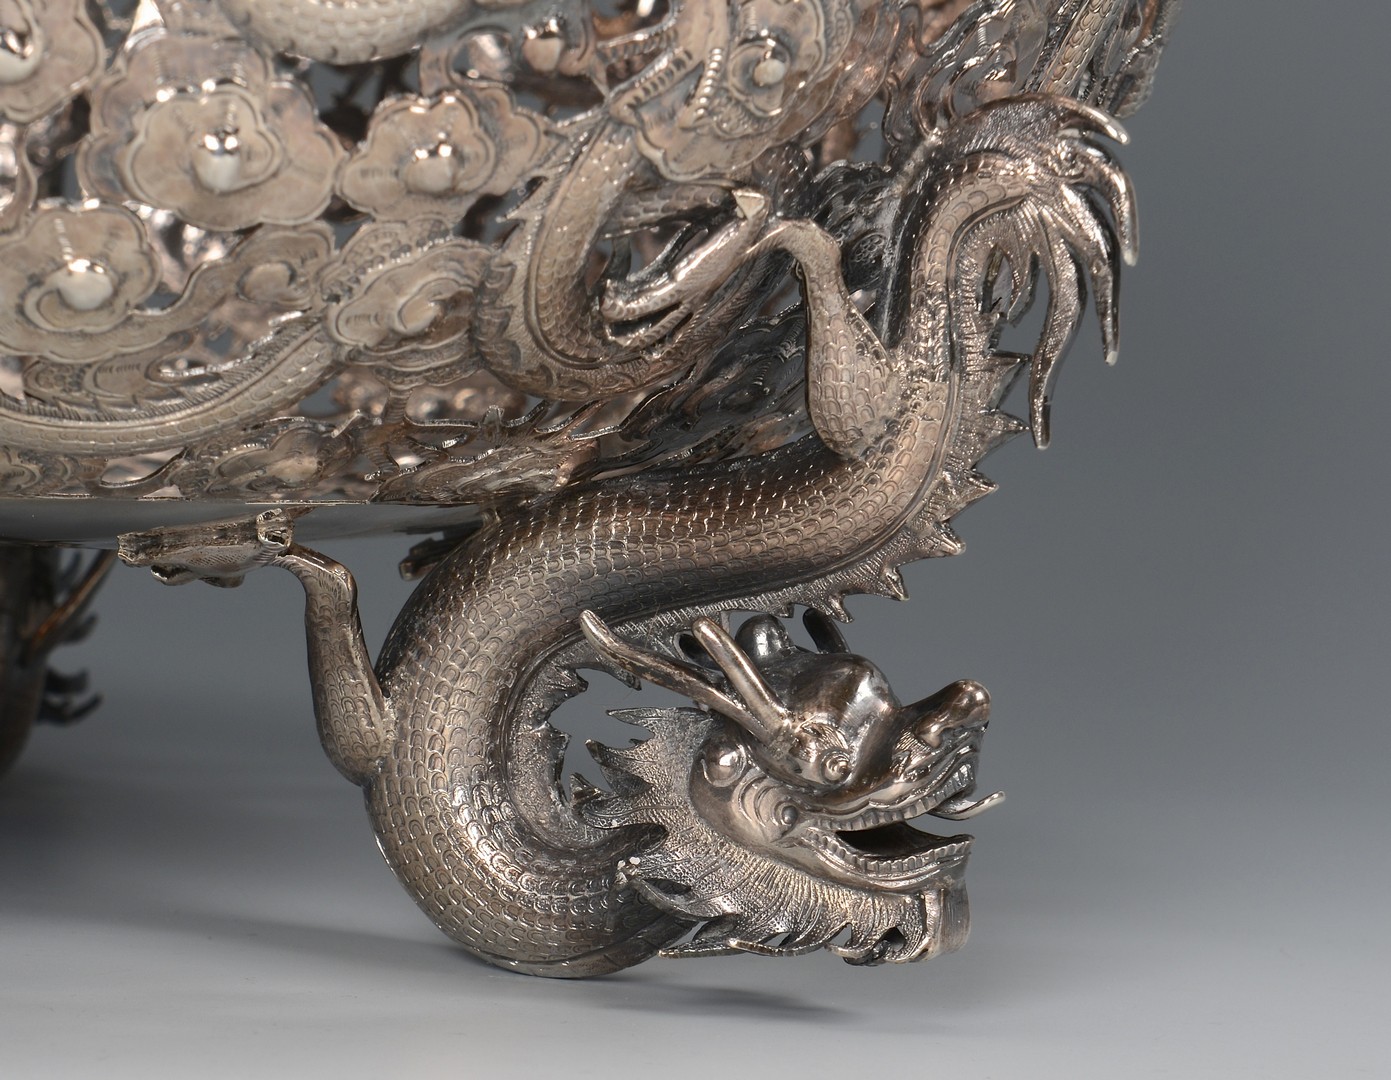 Lot 4: Large Chinese Export Silver Dragon Bowl